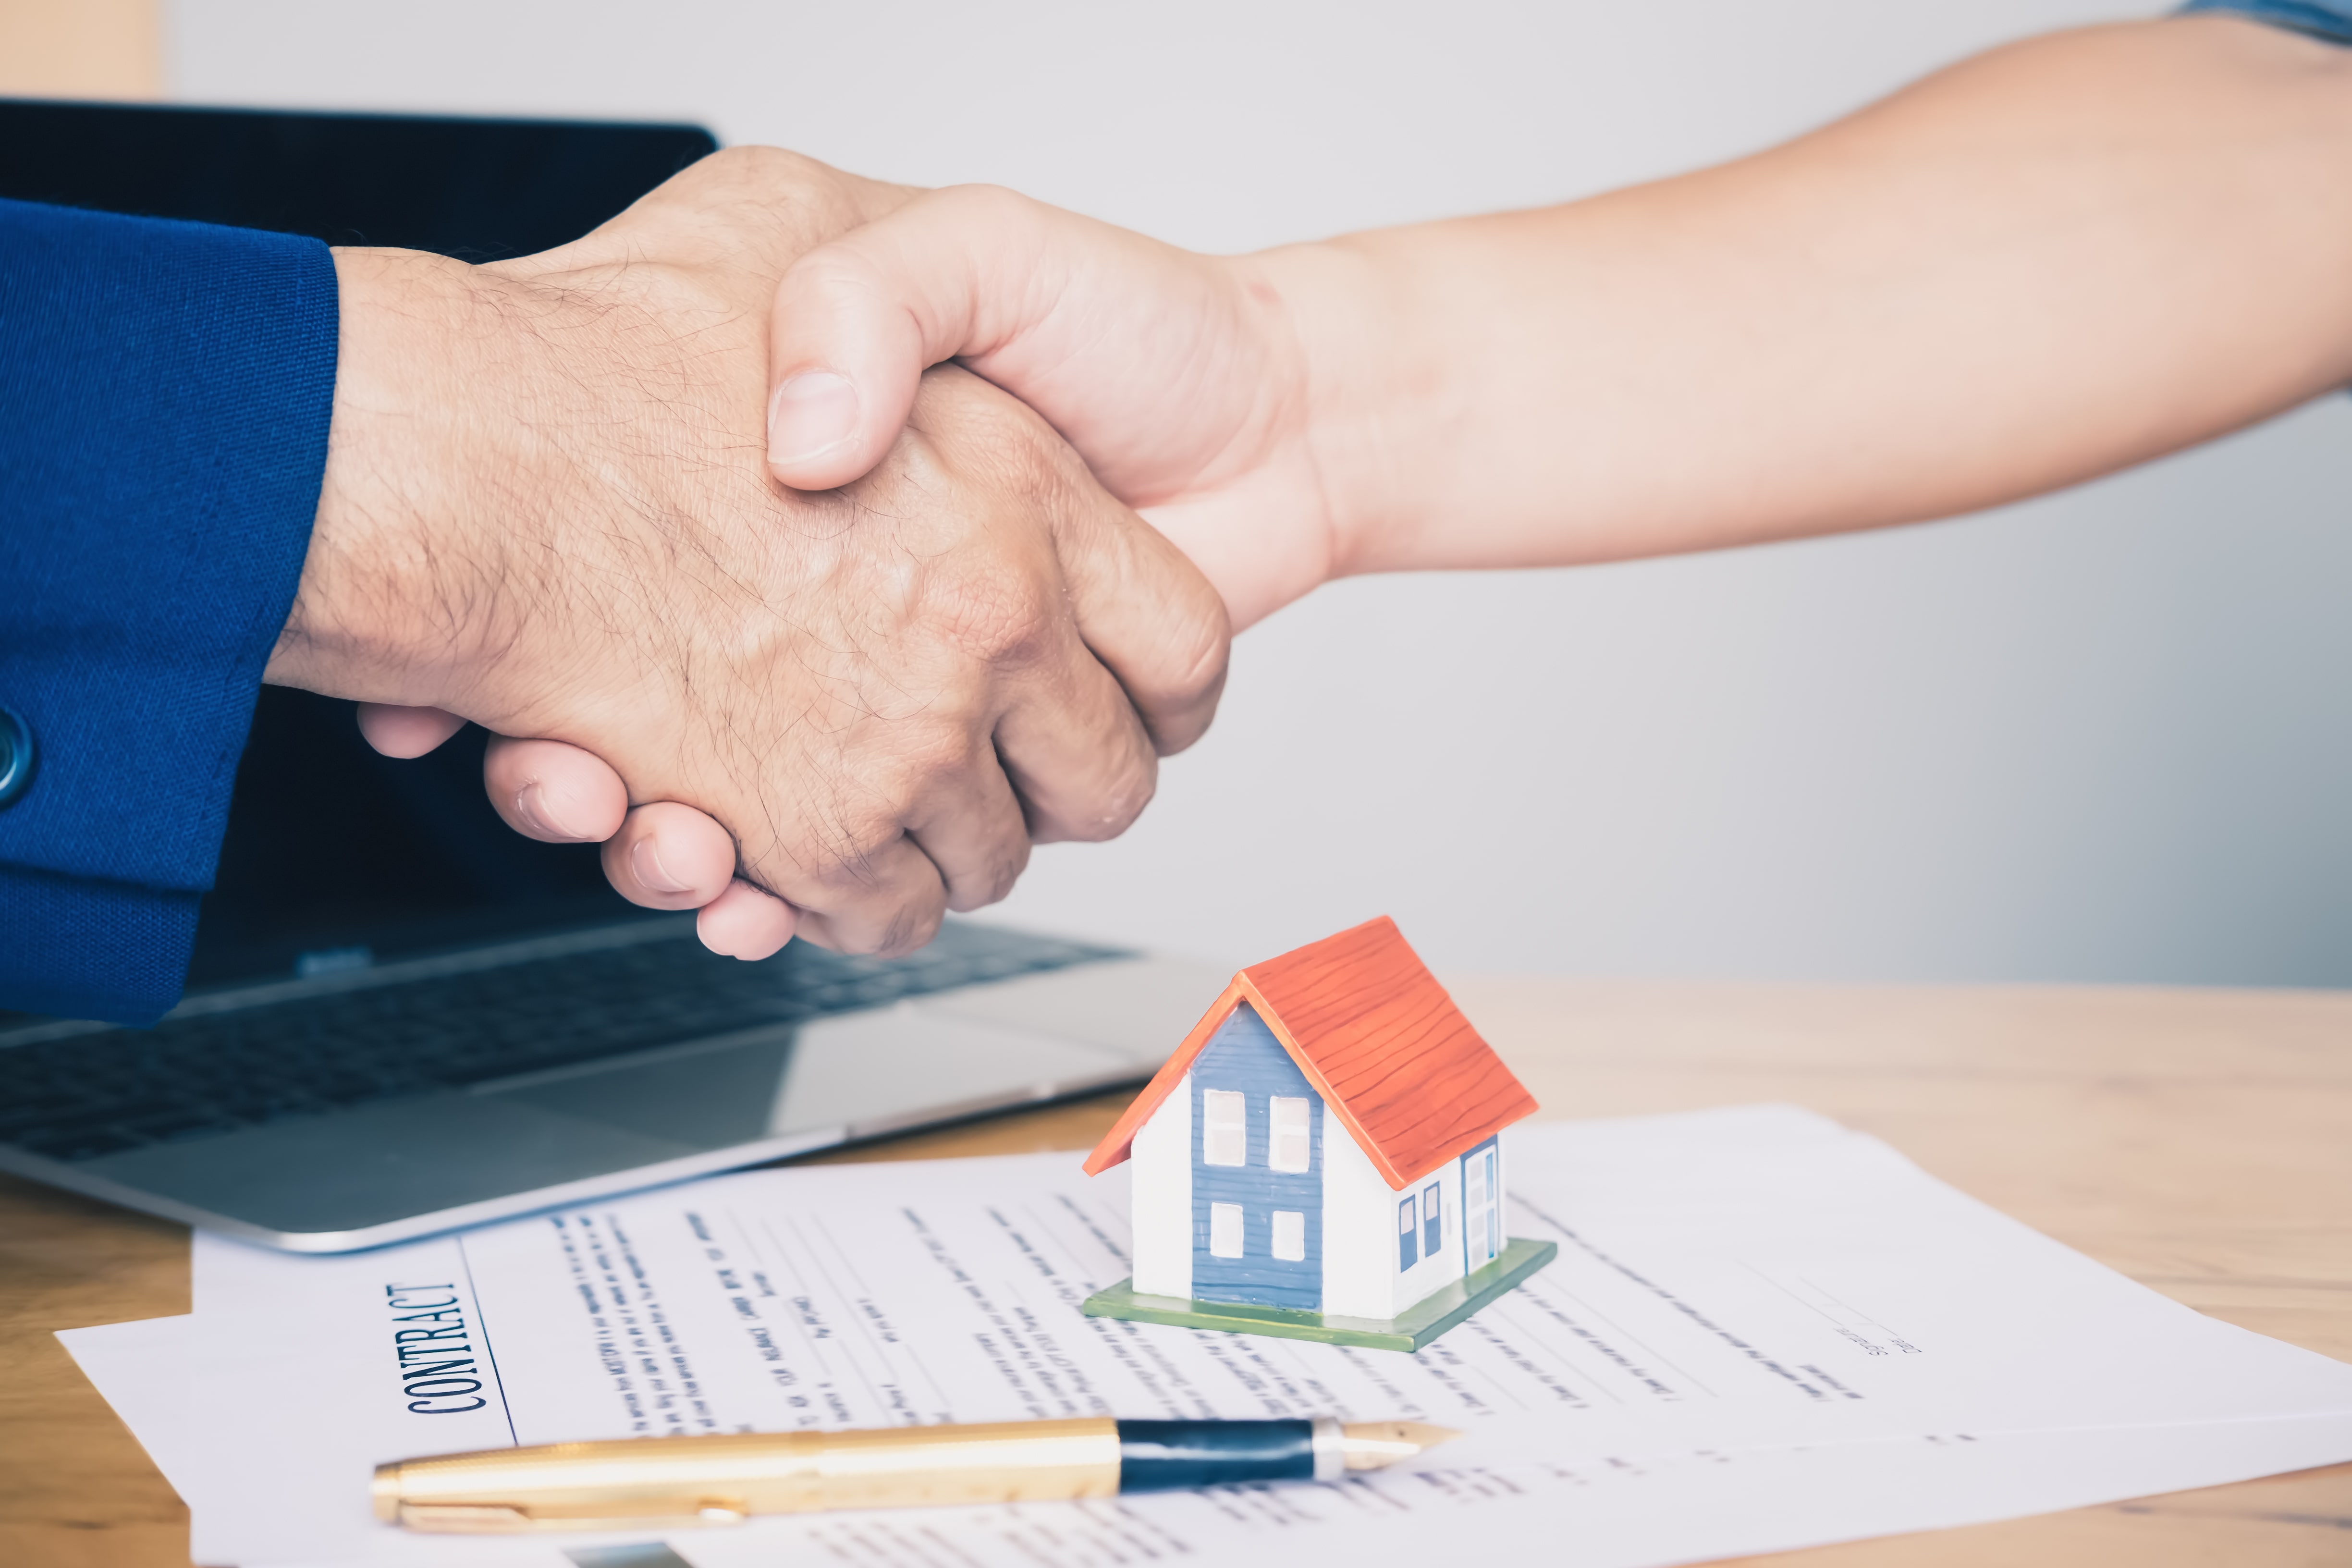 Real Estate Investor: What's Next After Buying Your First Rental Property?